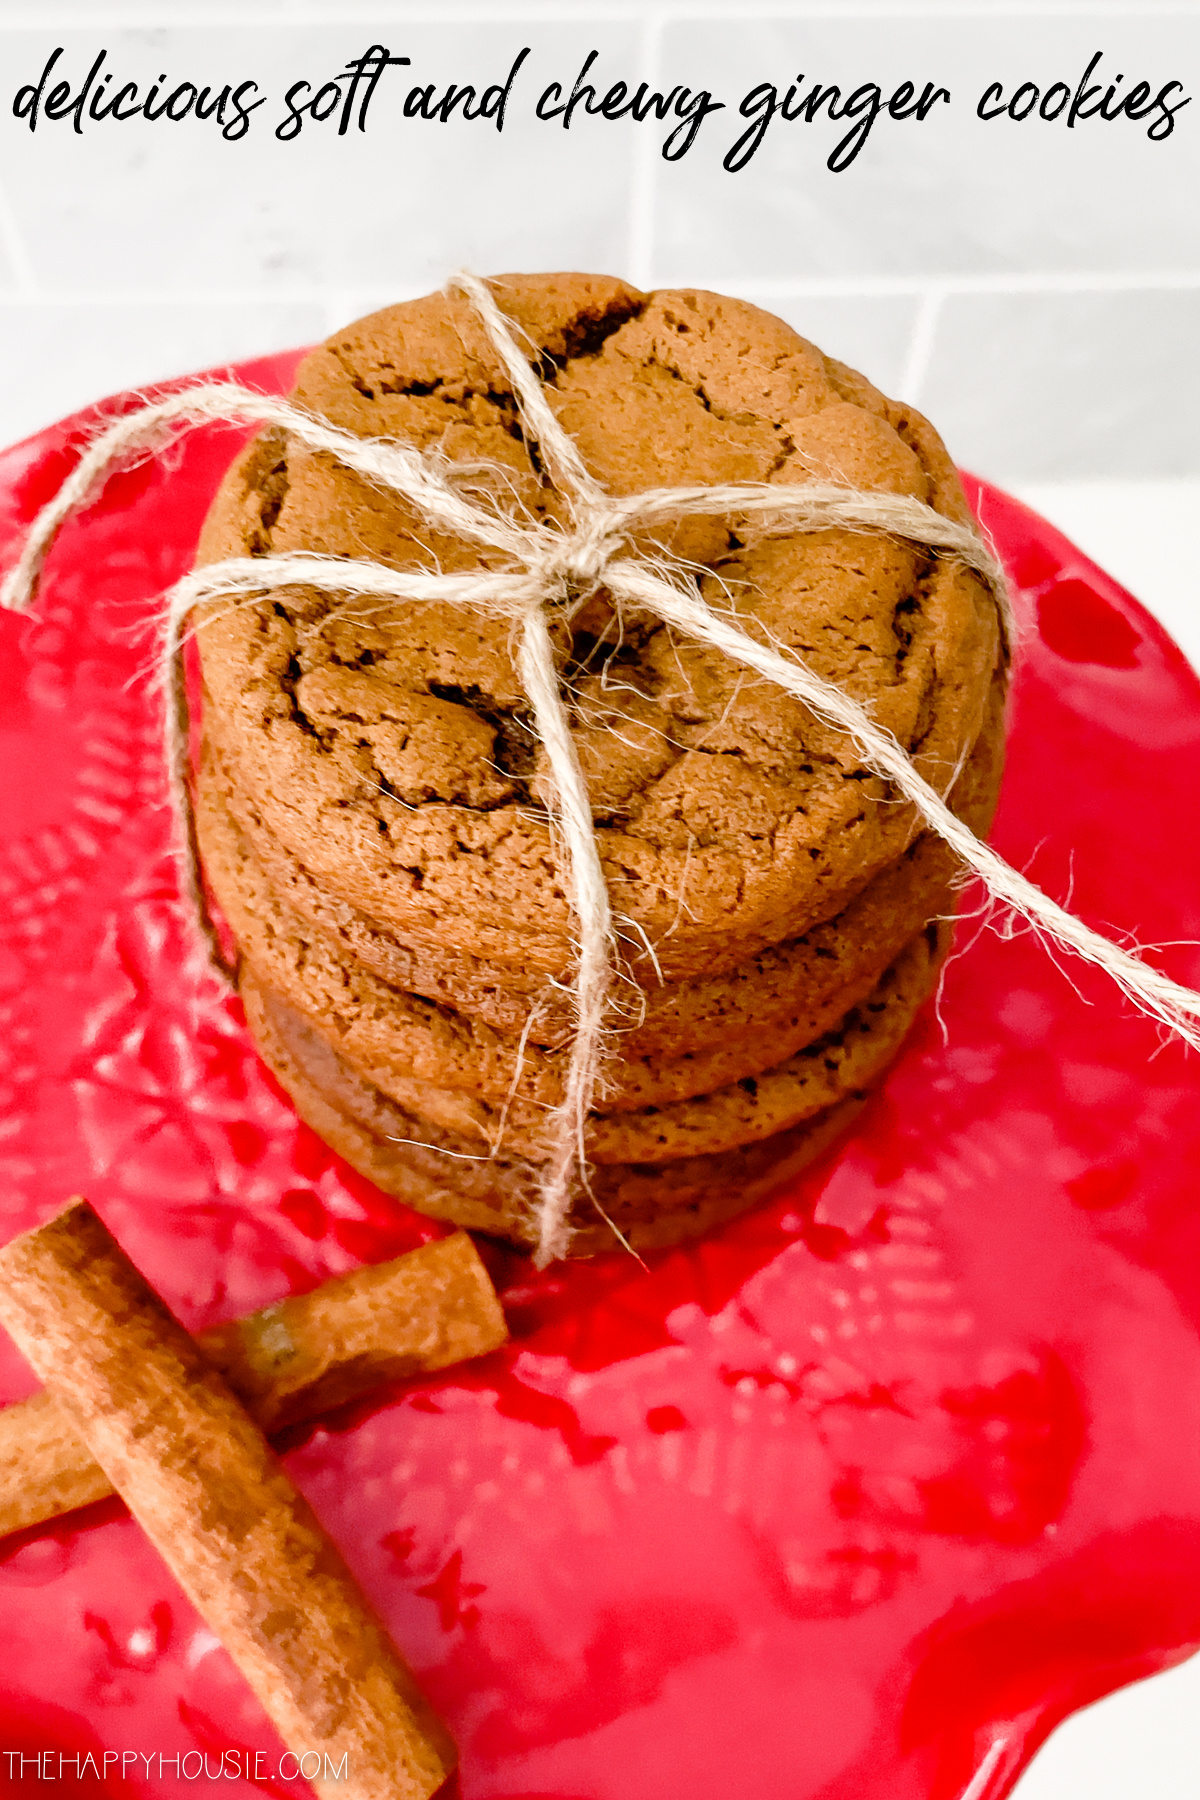 The cookies wrapped in twine.